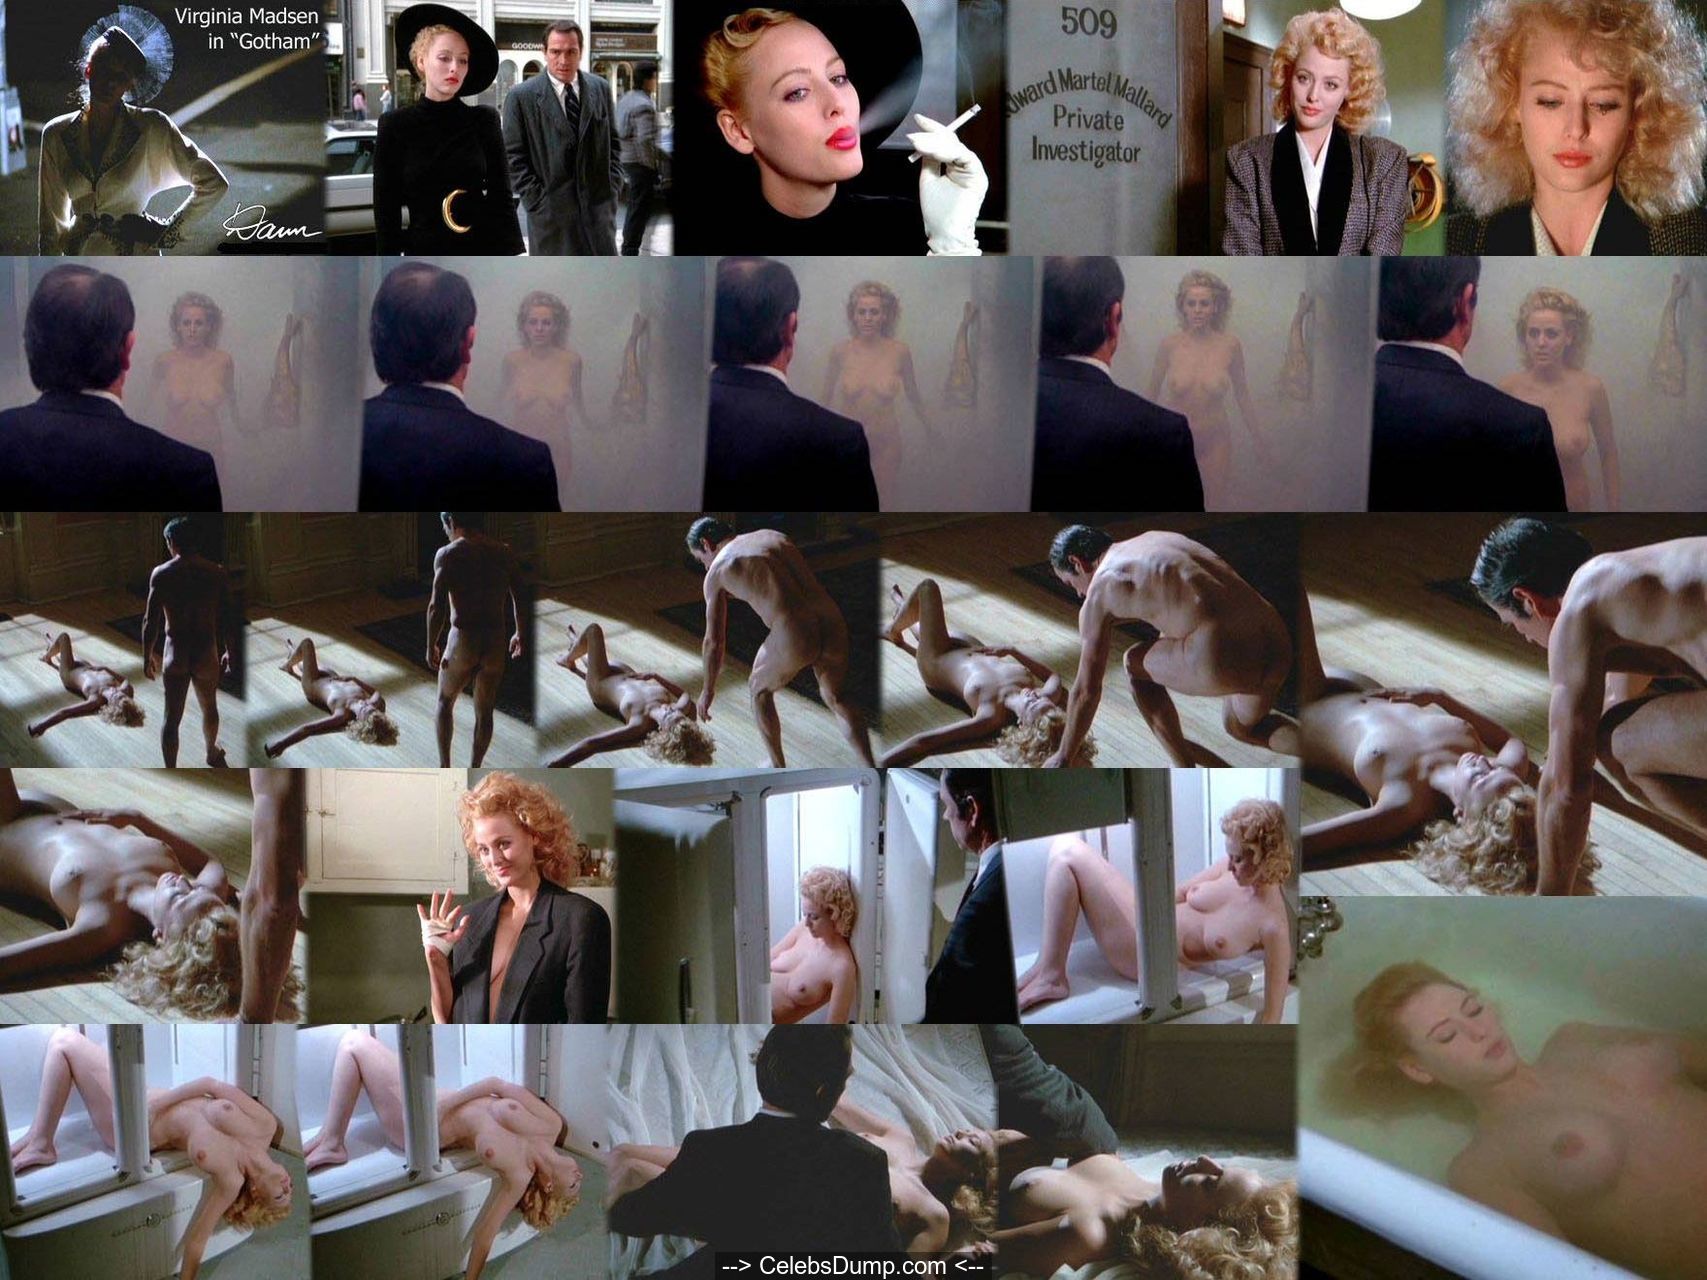 Virginia Madsen nude collages from Gotham.